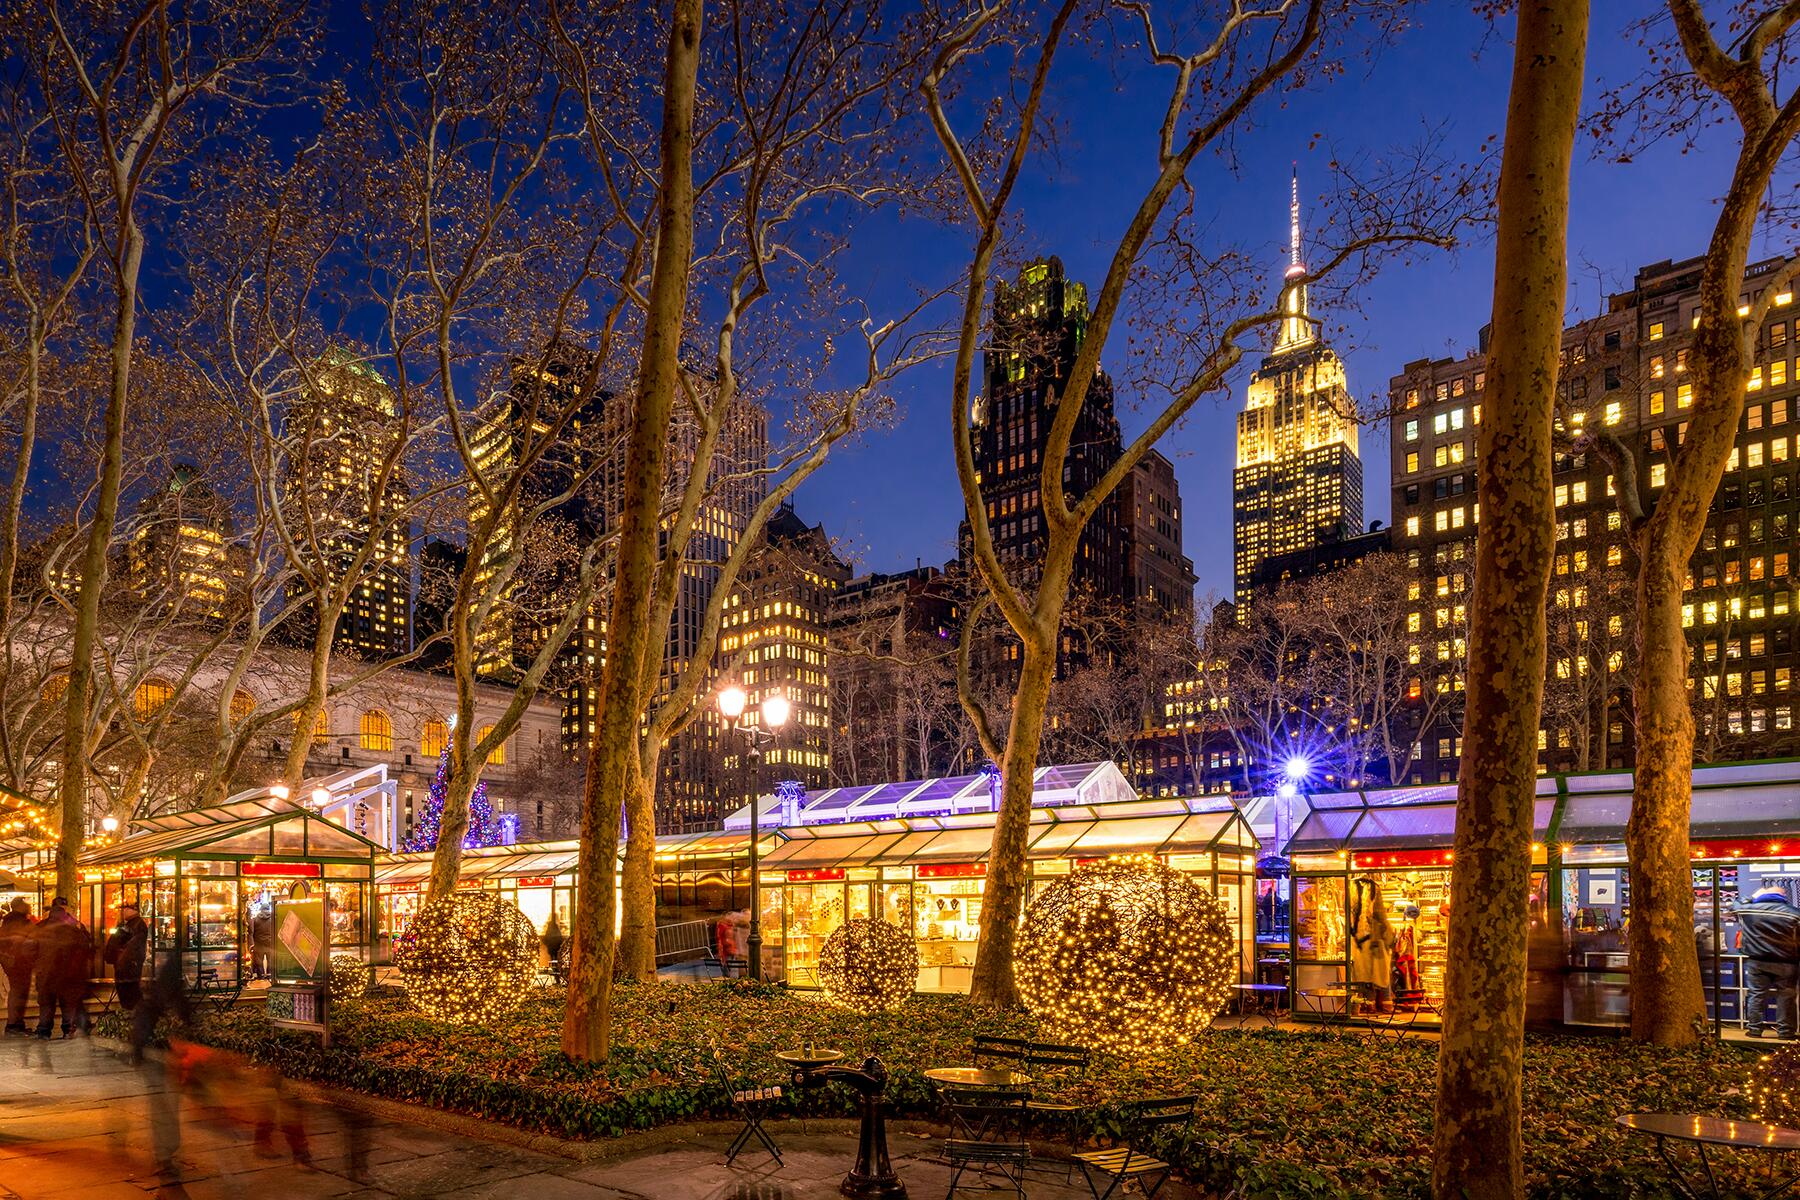 <a href='https://www.fodors.com/world/north-america/usa/new-york/new-york-city/experiences/news/photos/best-ways-to-enjoy-the-holidays-in-new-york-city#'>From &quot;12 Festive Ways to Enjoy the Holidays in New York City: Make Bryant Park Your Go-to Holiday Destination&quot;</a>